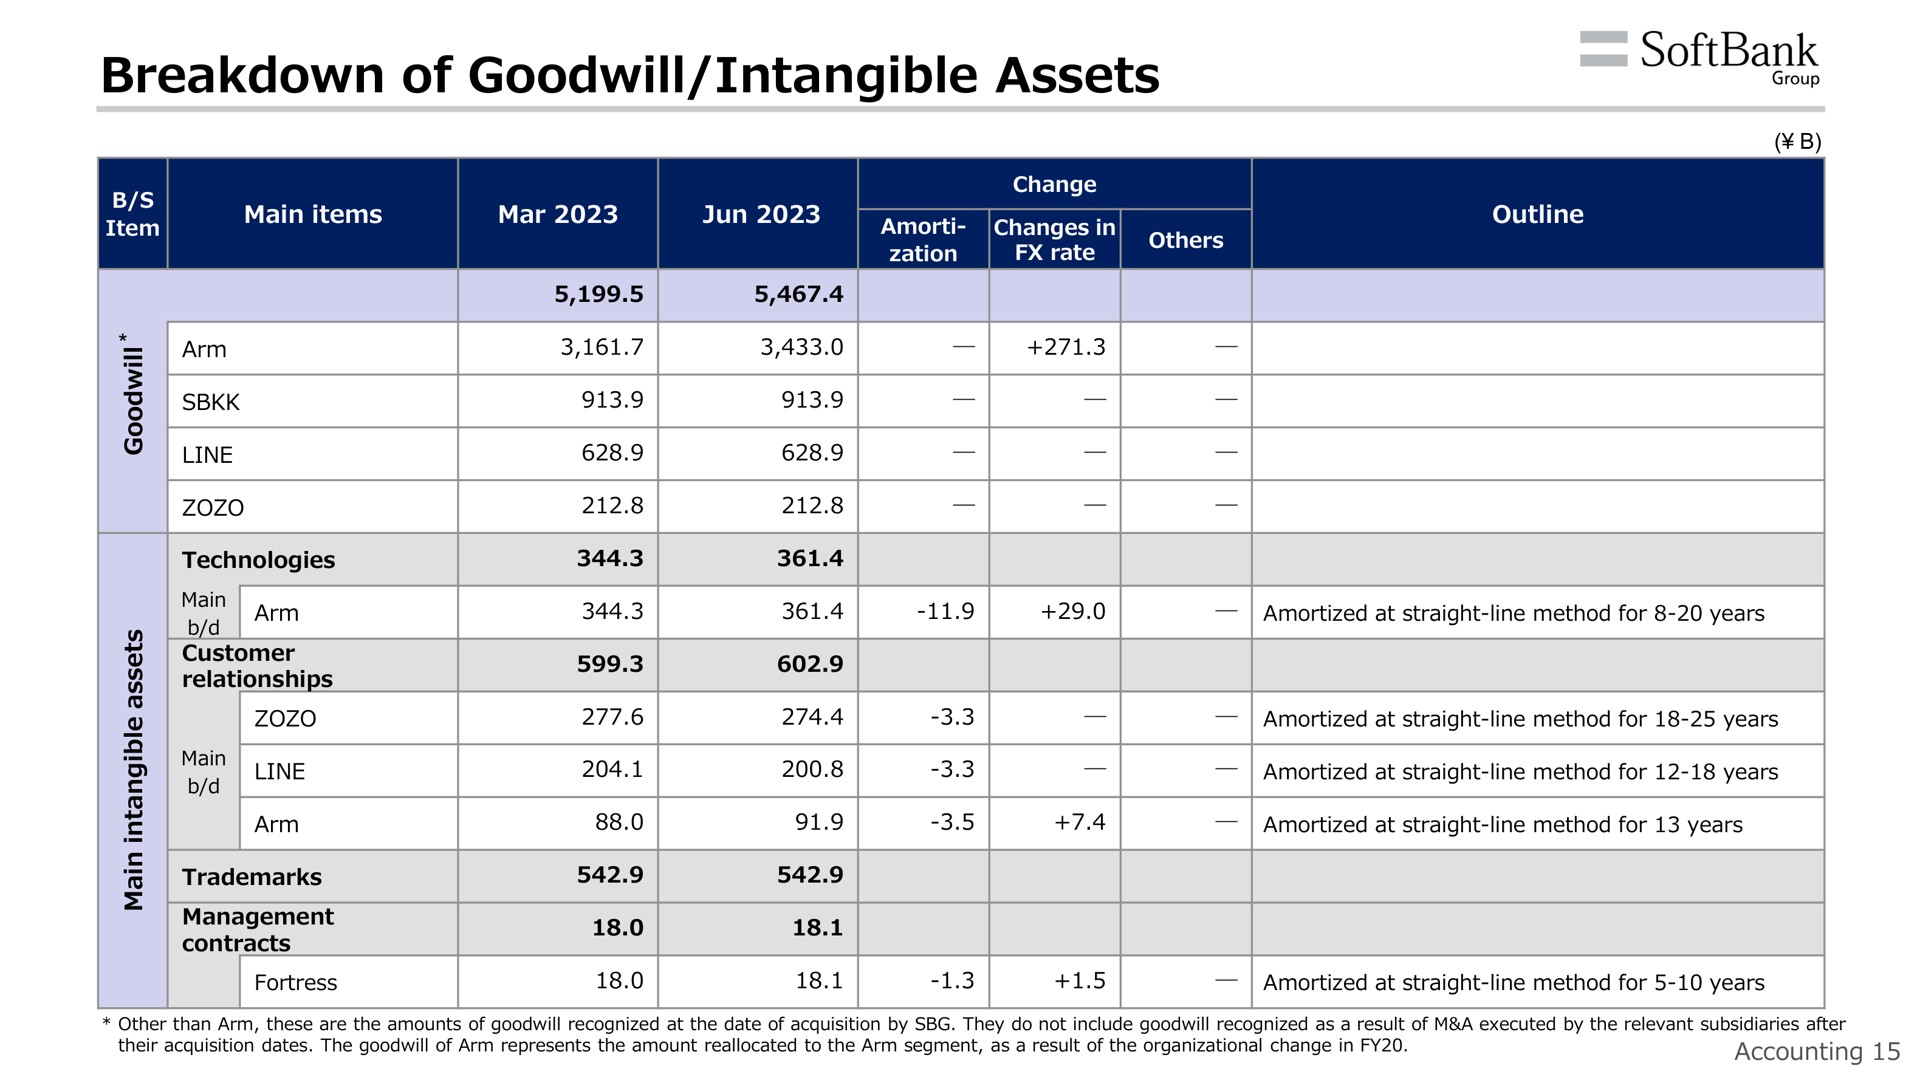 breakdown of goodwill intangible assets | SoftBank